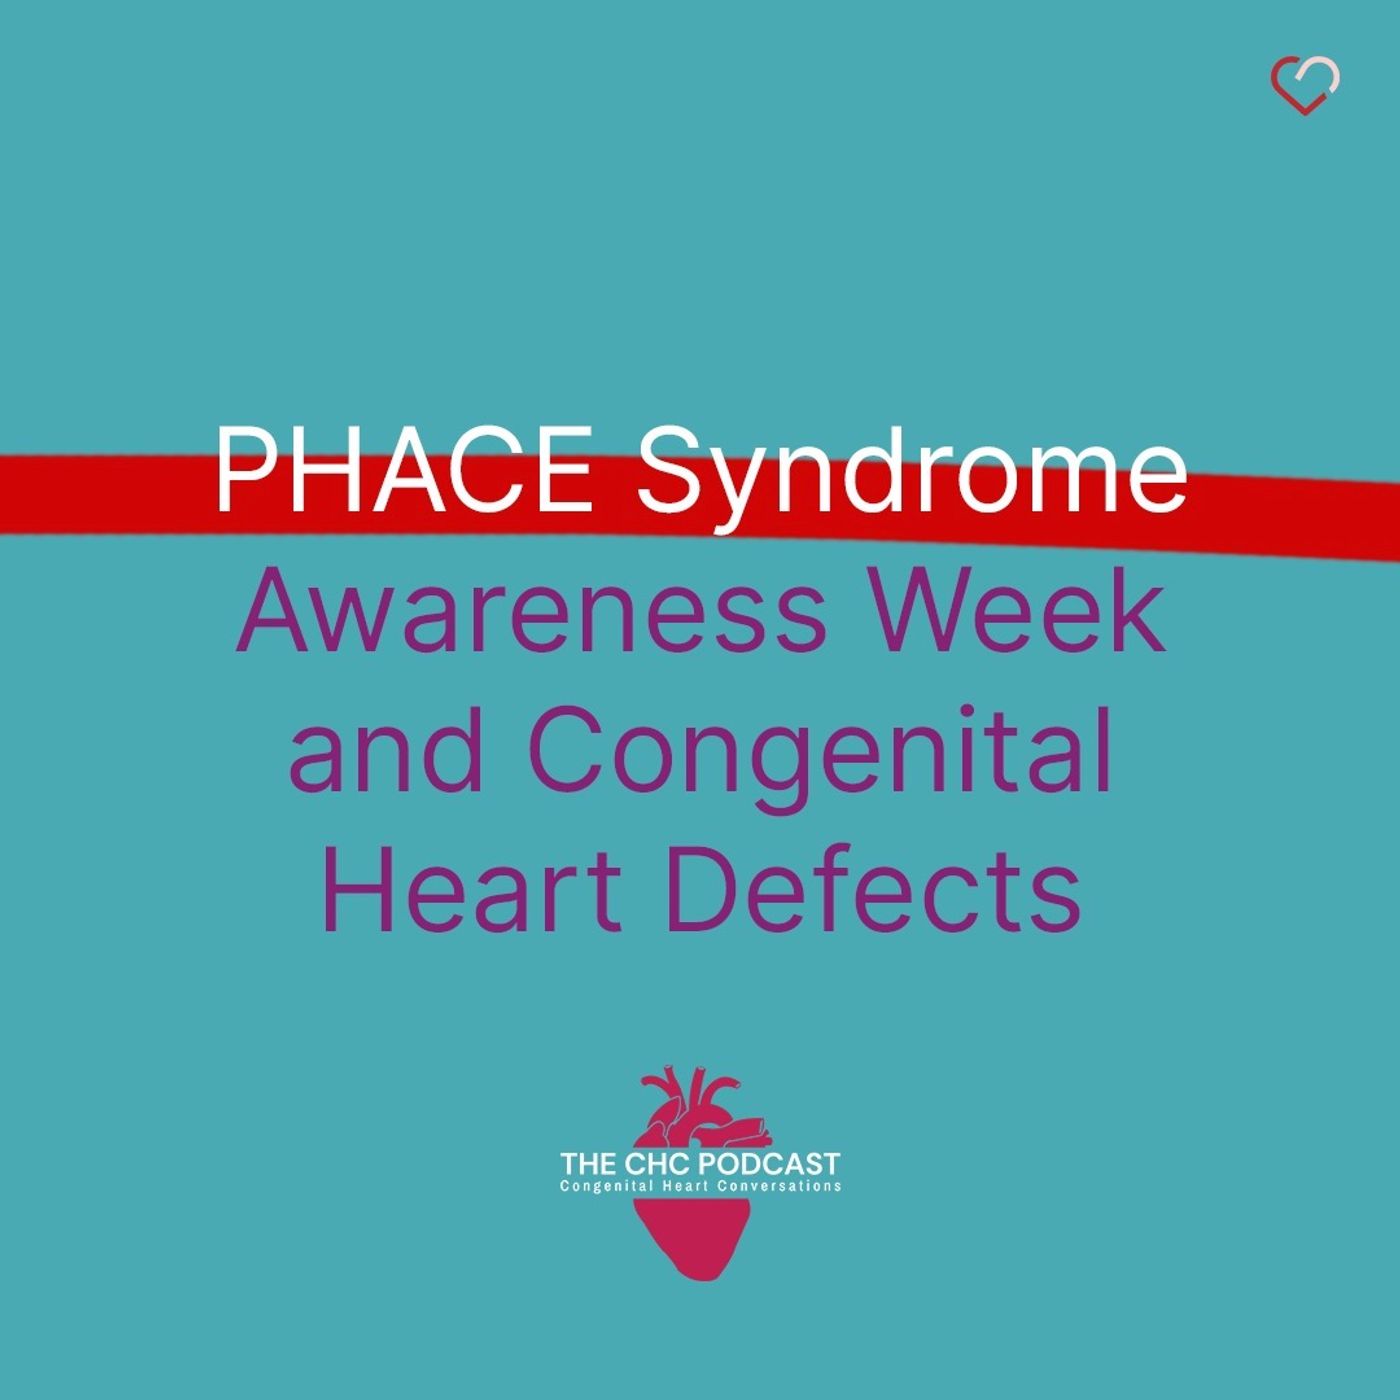 PHACE Syndrome Awareness Week and Congenital Heart Defects